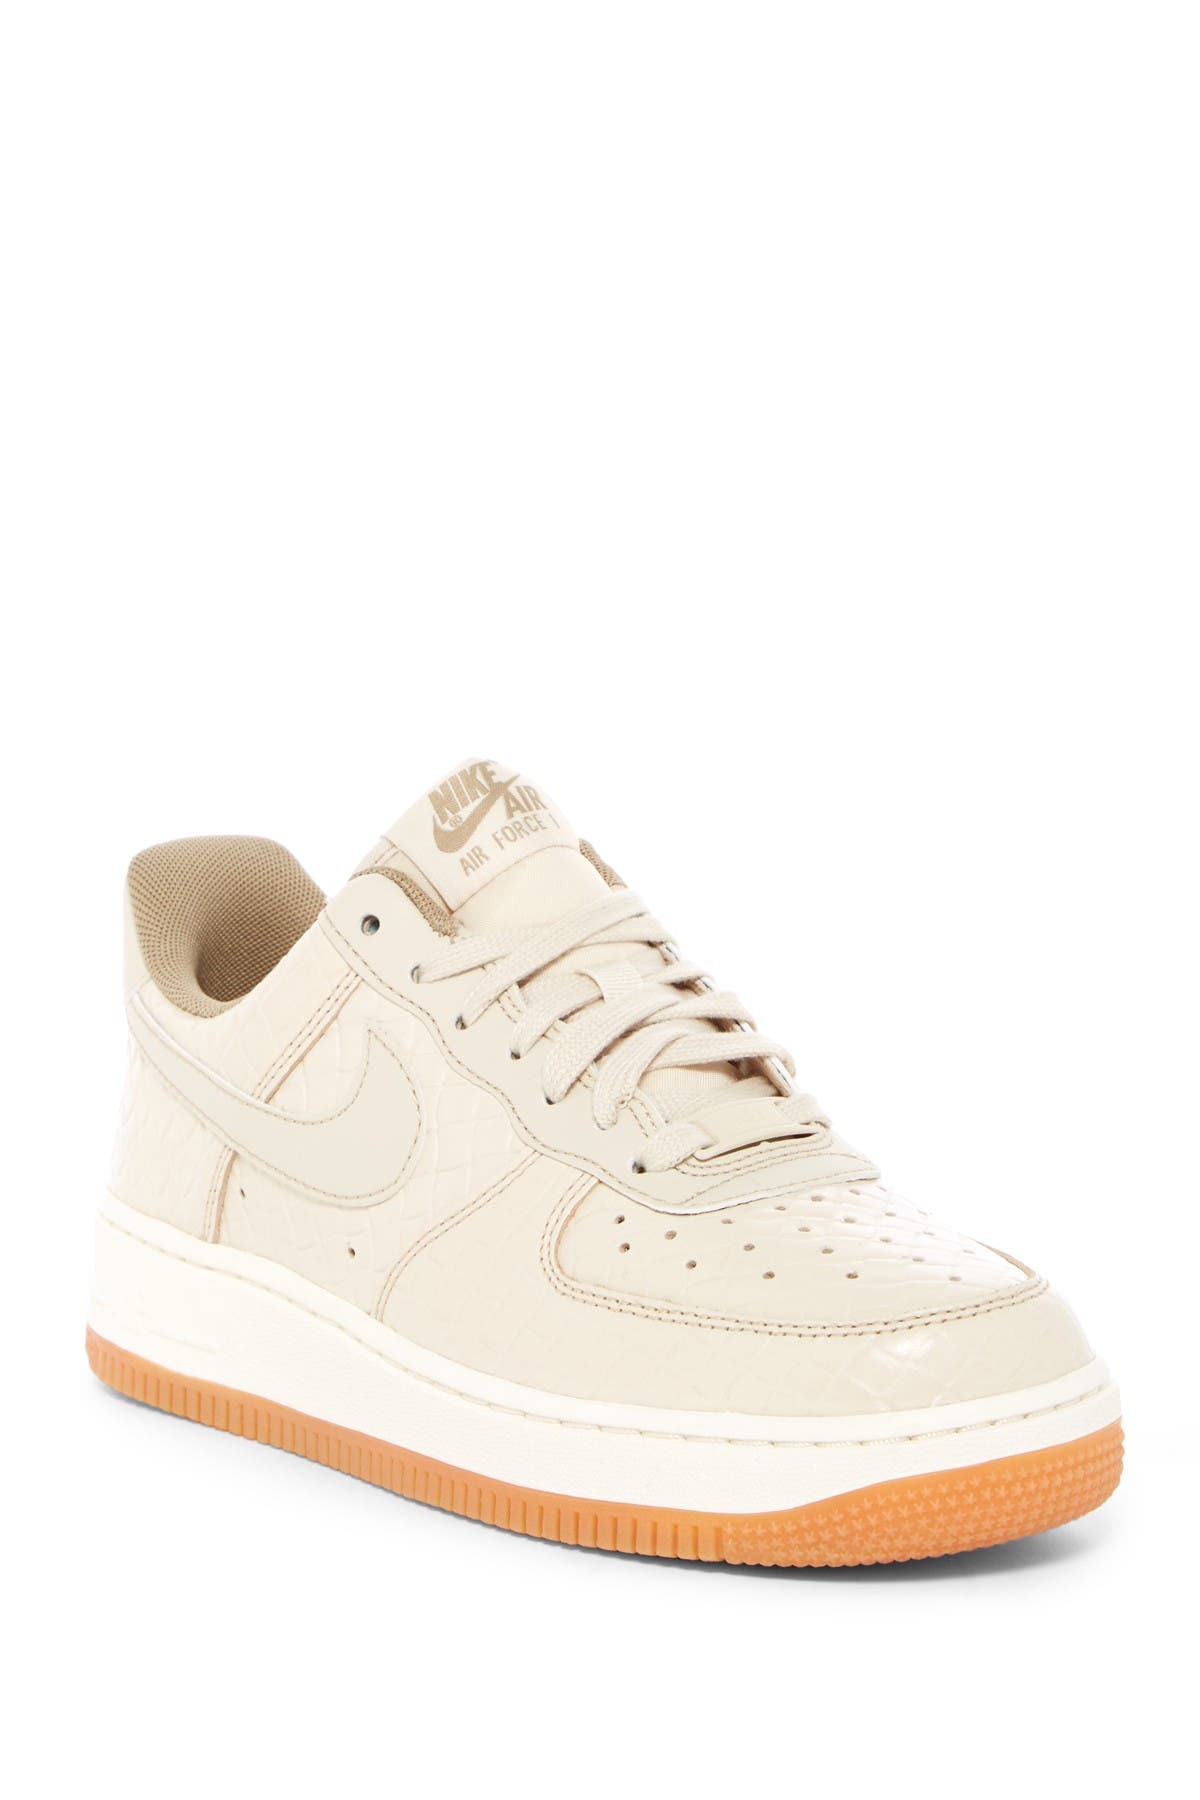 air force ones nordstrom